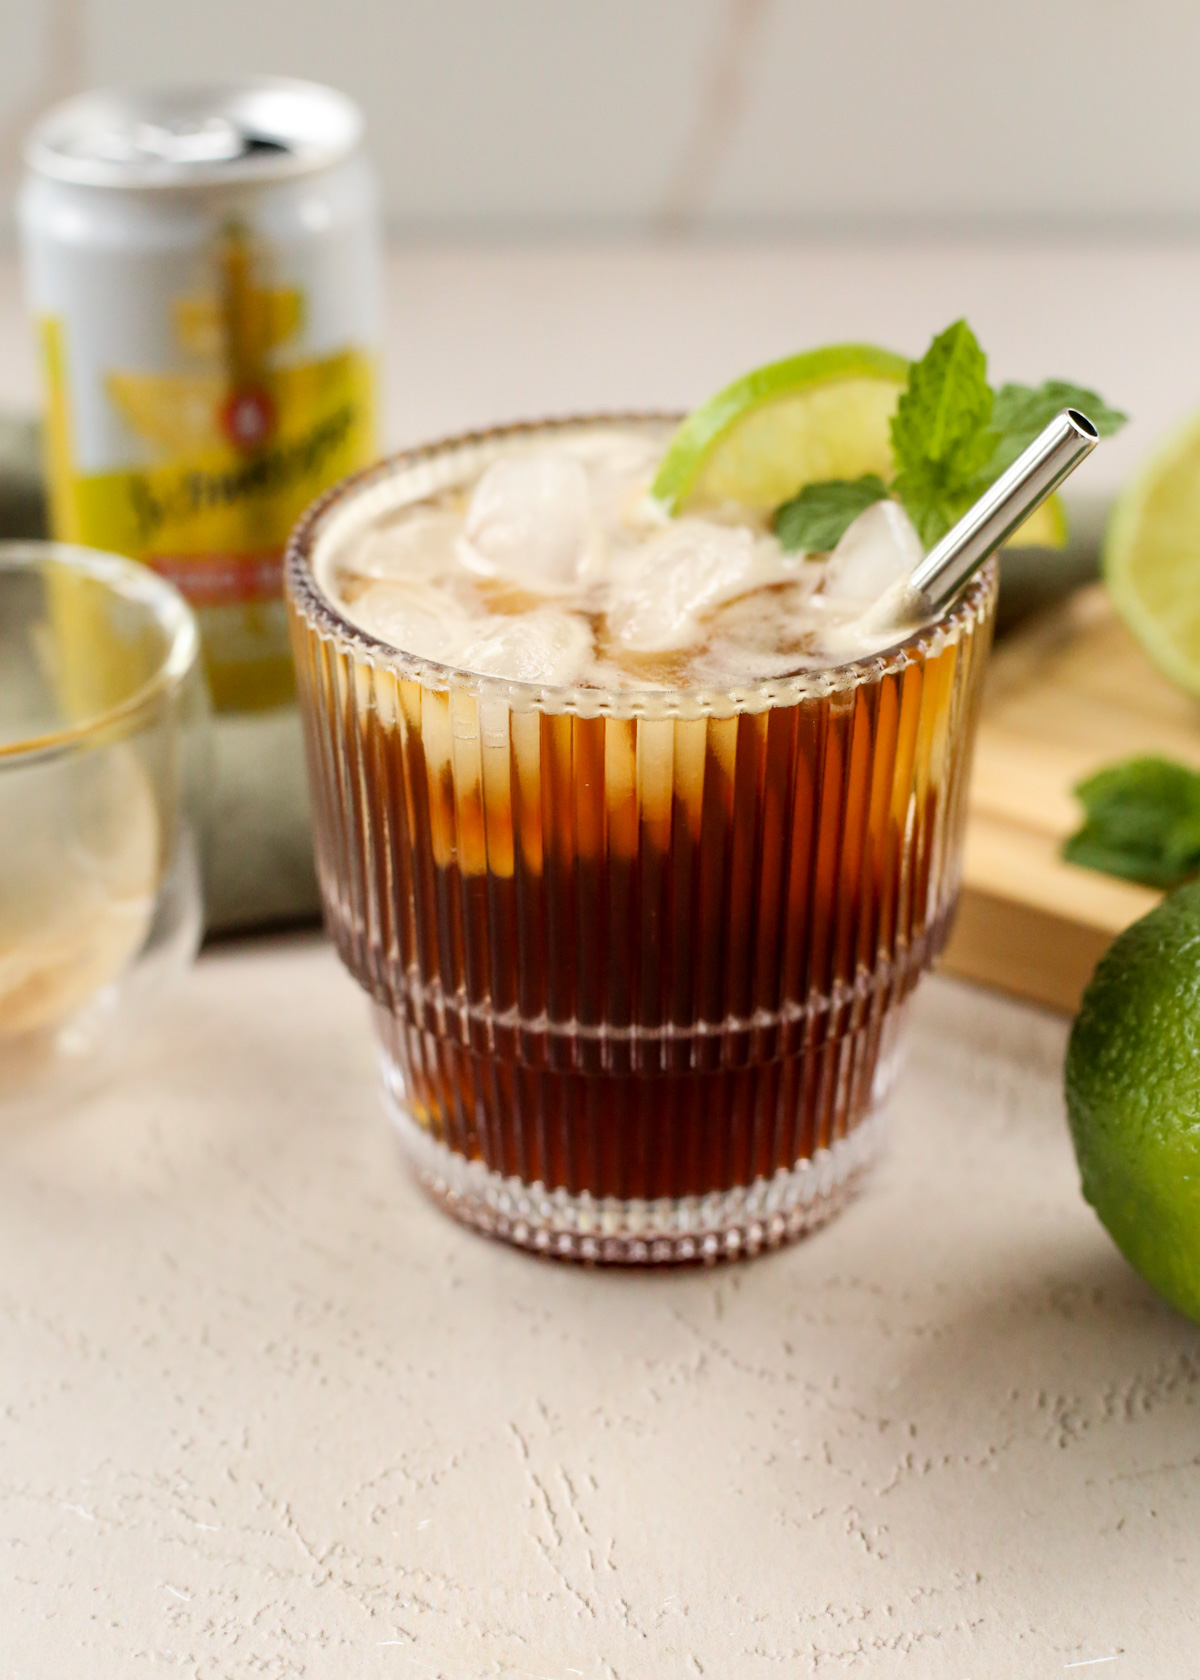 A clear glass filled with espresso and tonic with ice cubes and garnished with a slice of lime and sprig of mint